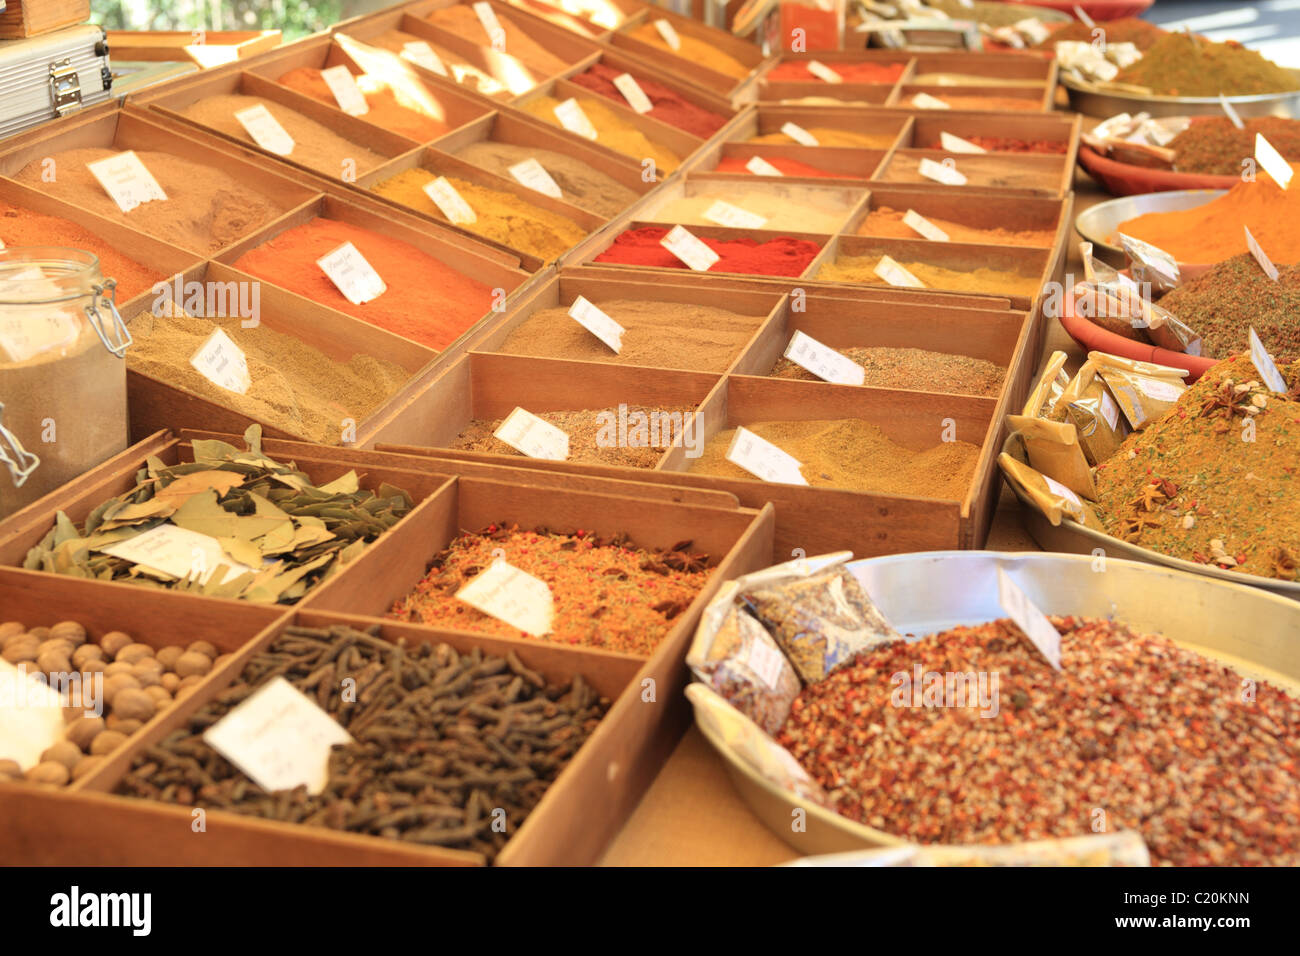 Provence market selling products spicies Stock Photo